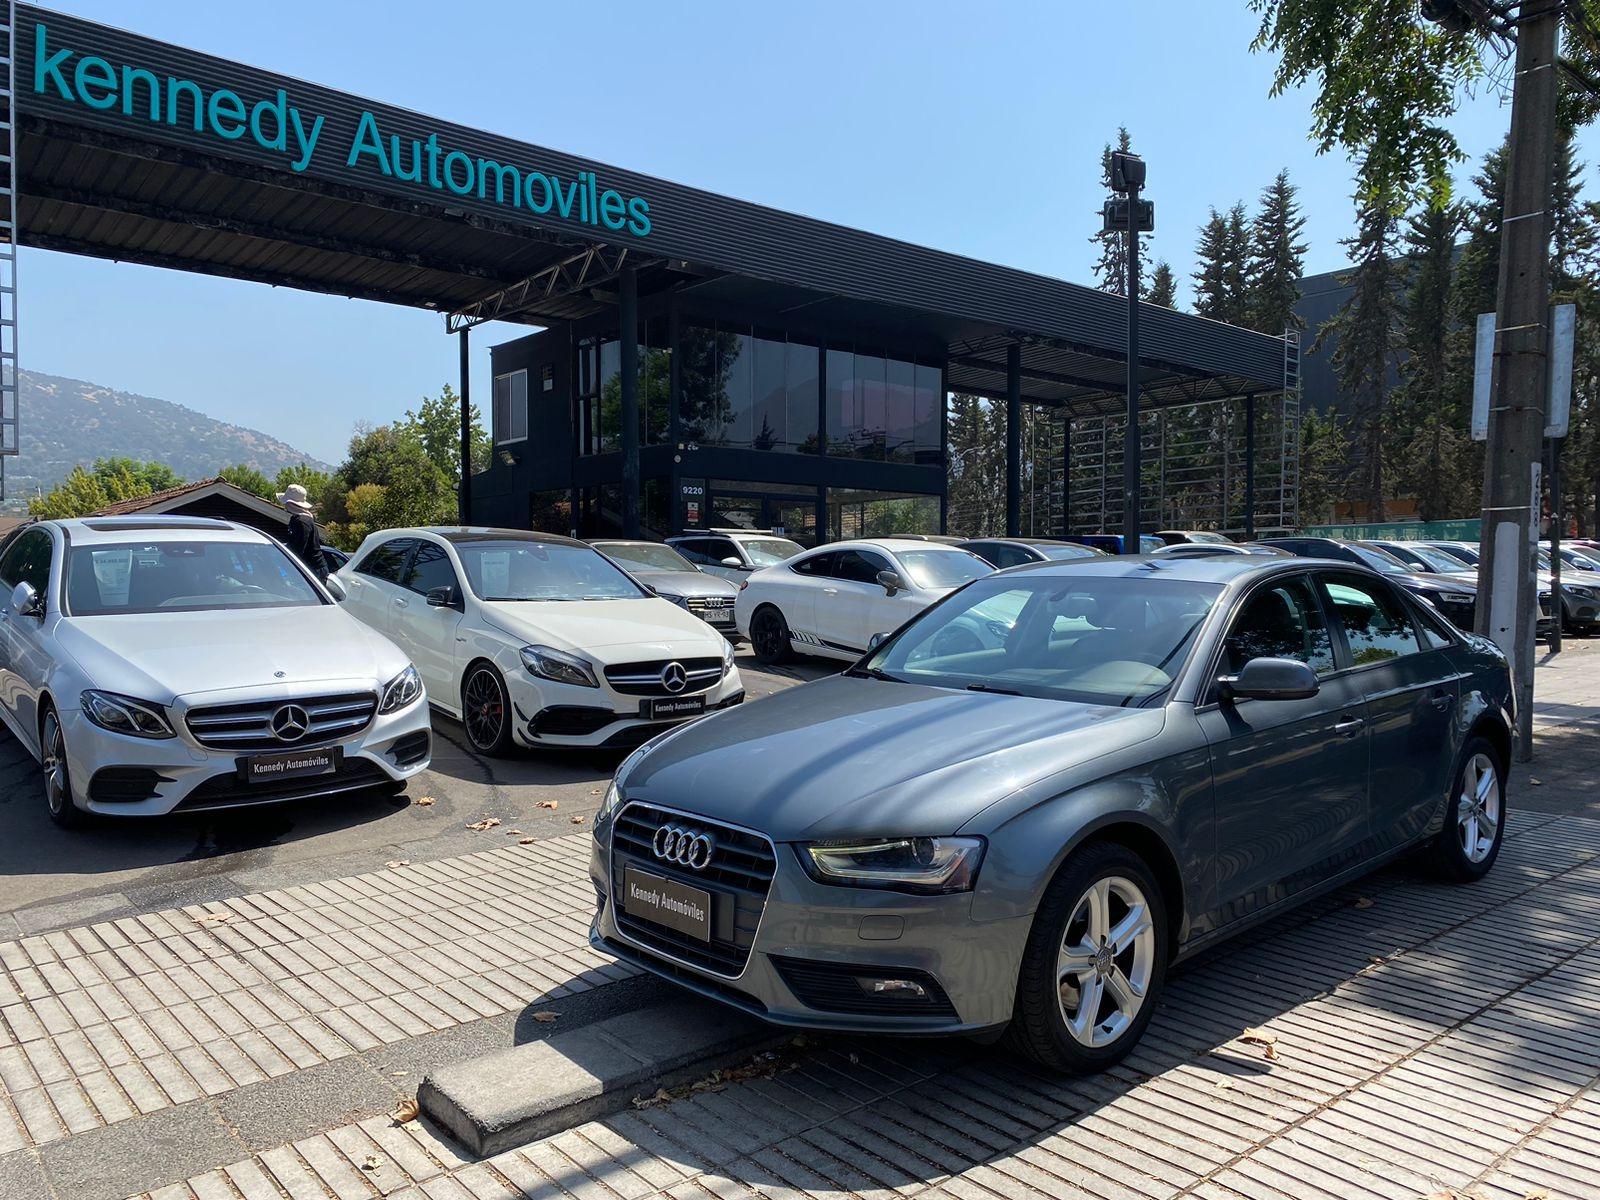 AUDI A4 1.8 TFSI  Multitronic Dynamic  2015 Impecable - KENNEDY AUTOMOVILES